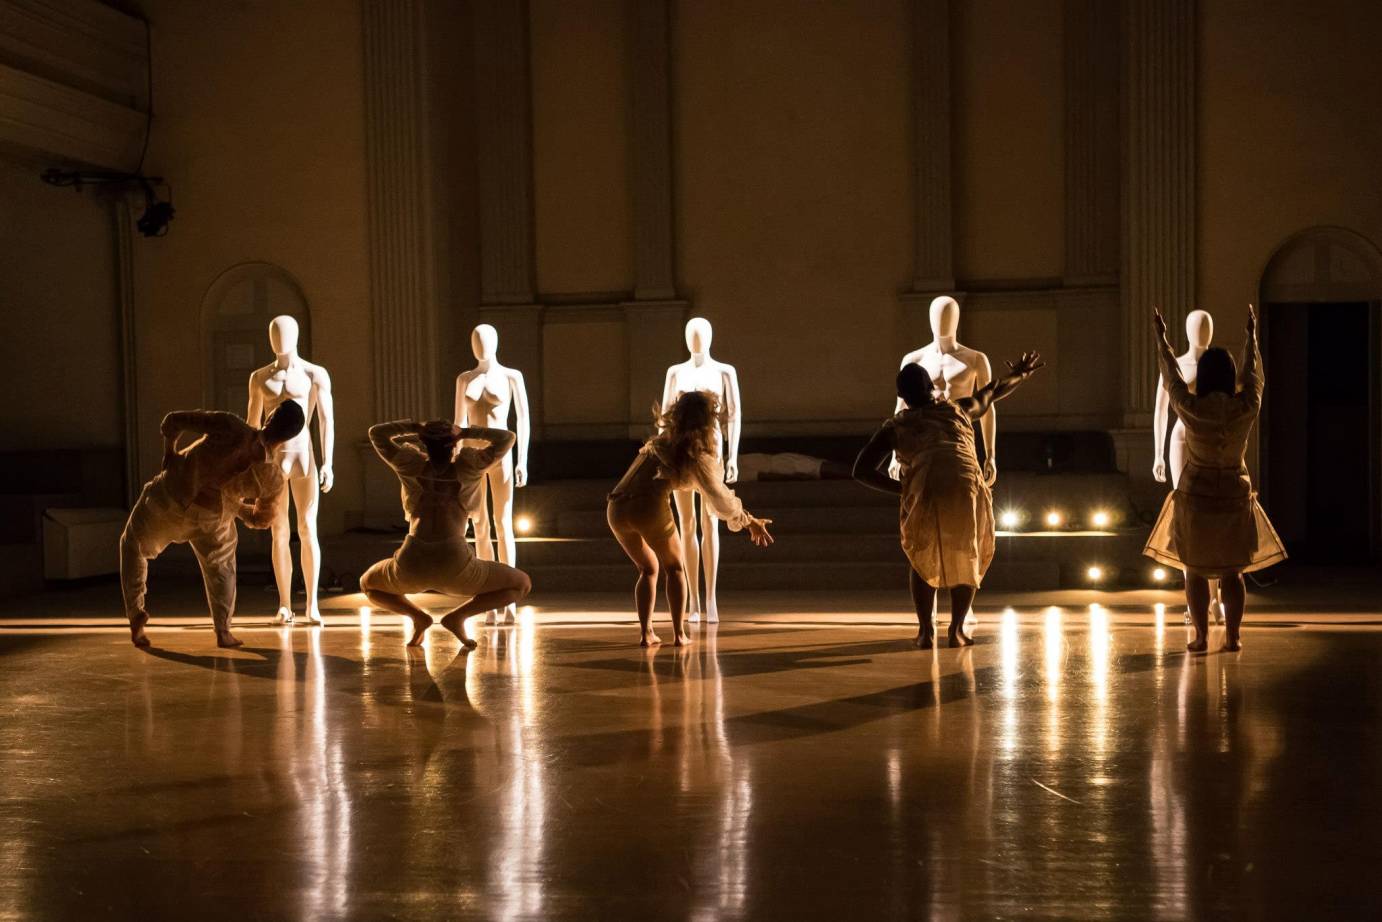 Each dancer gestures to their mannequin counterpart; their backs are towards the audience